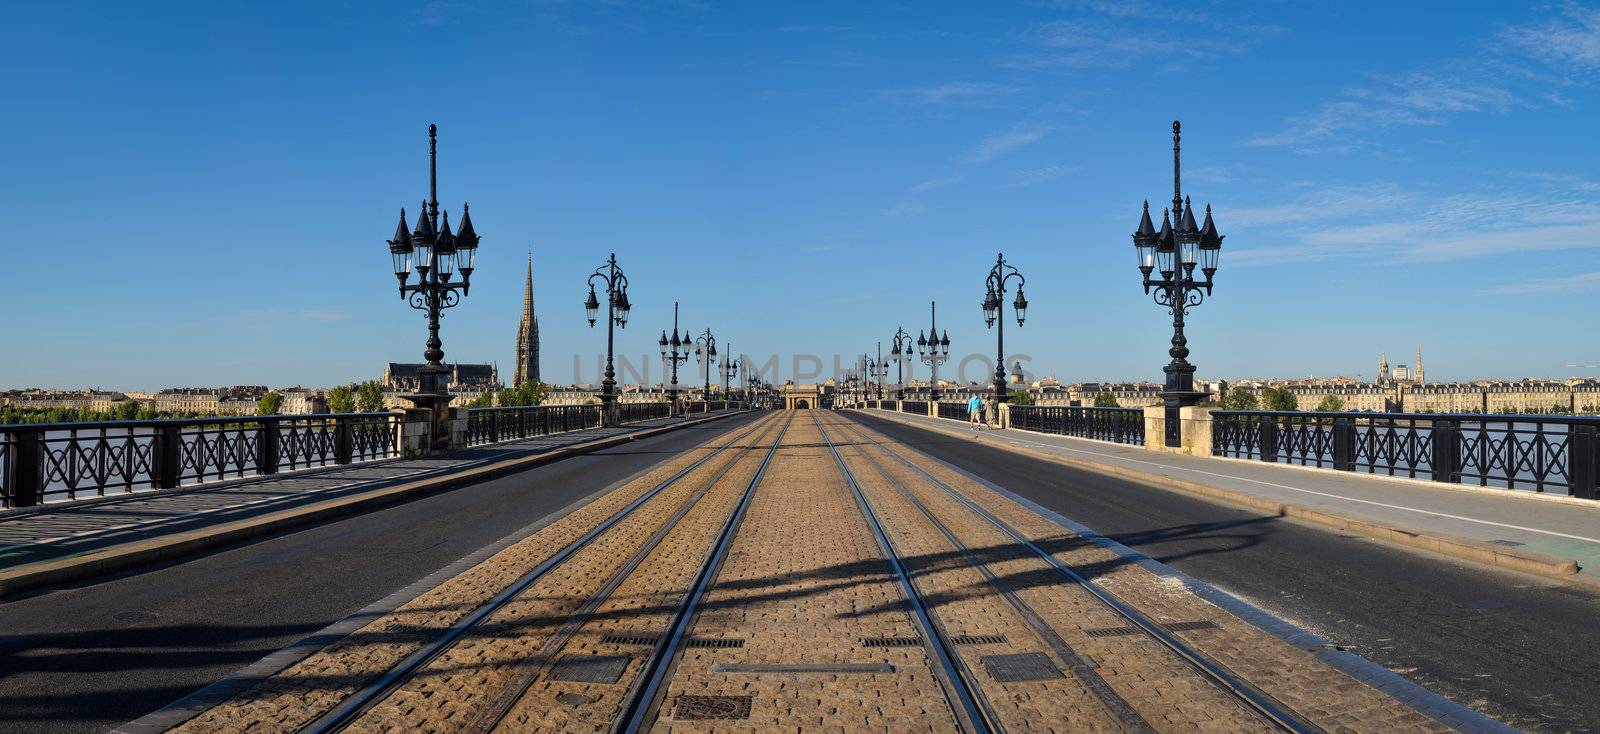 Bordeaux panorama of the bridge, view during the day